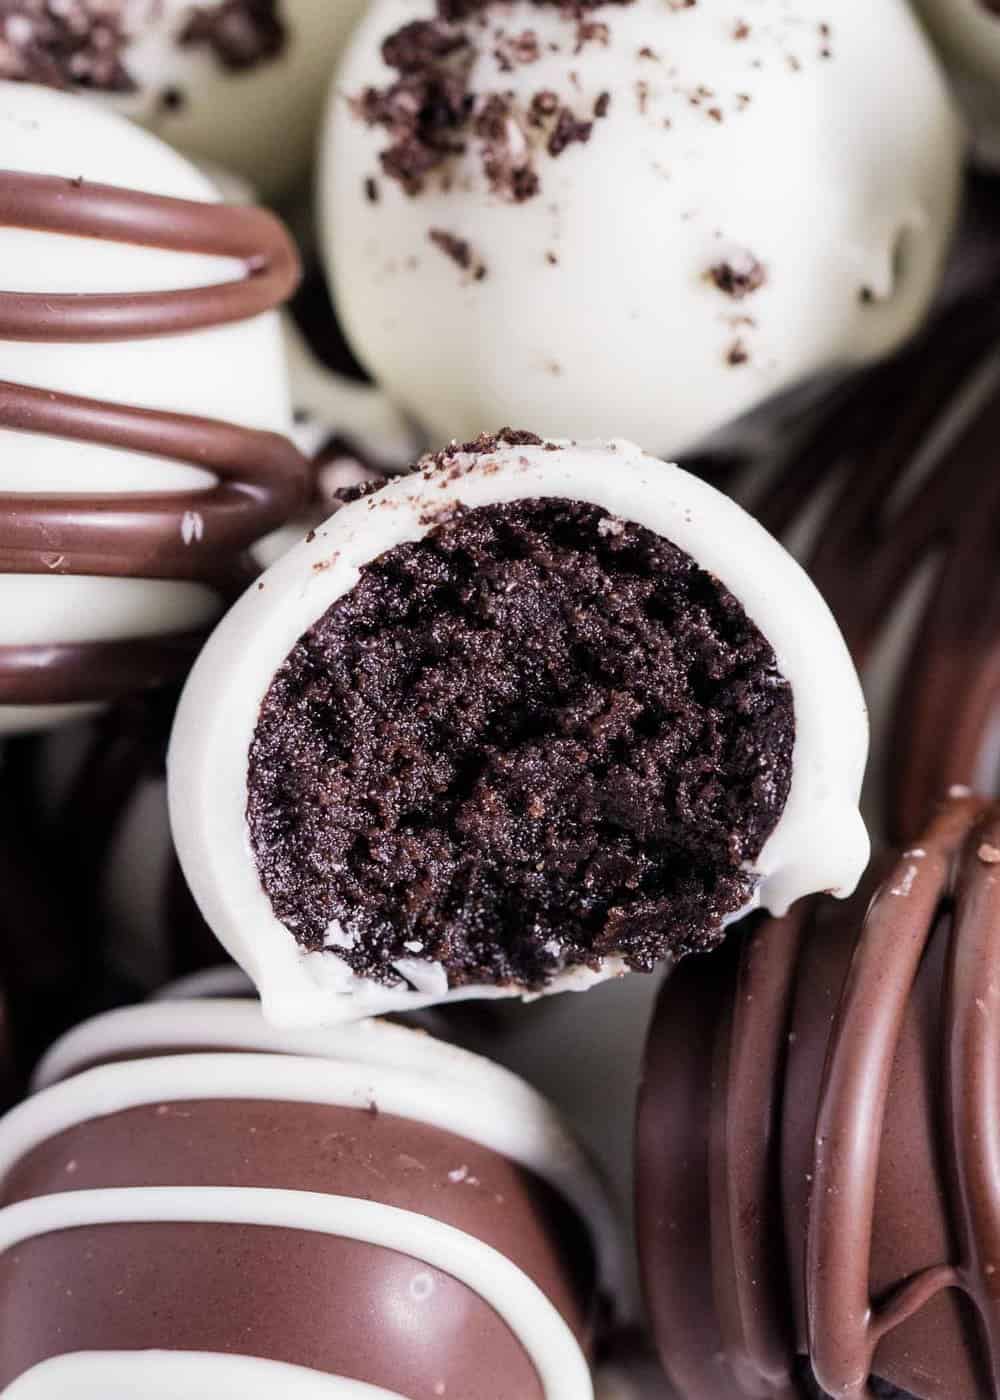 Oreo balls dipped in chocolate with a bite taken.